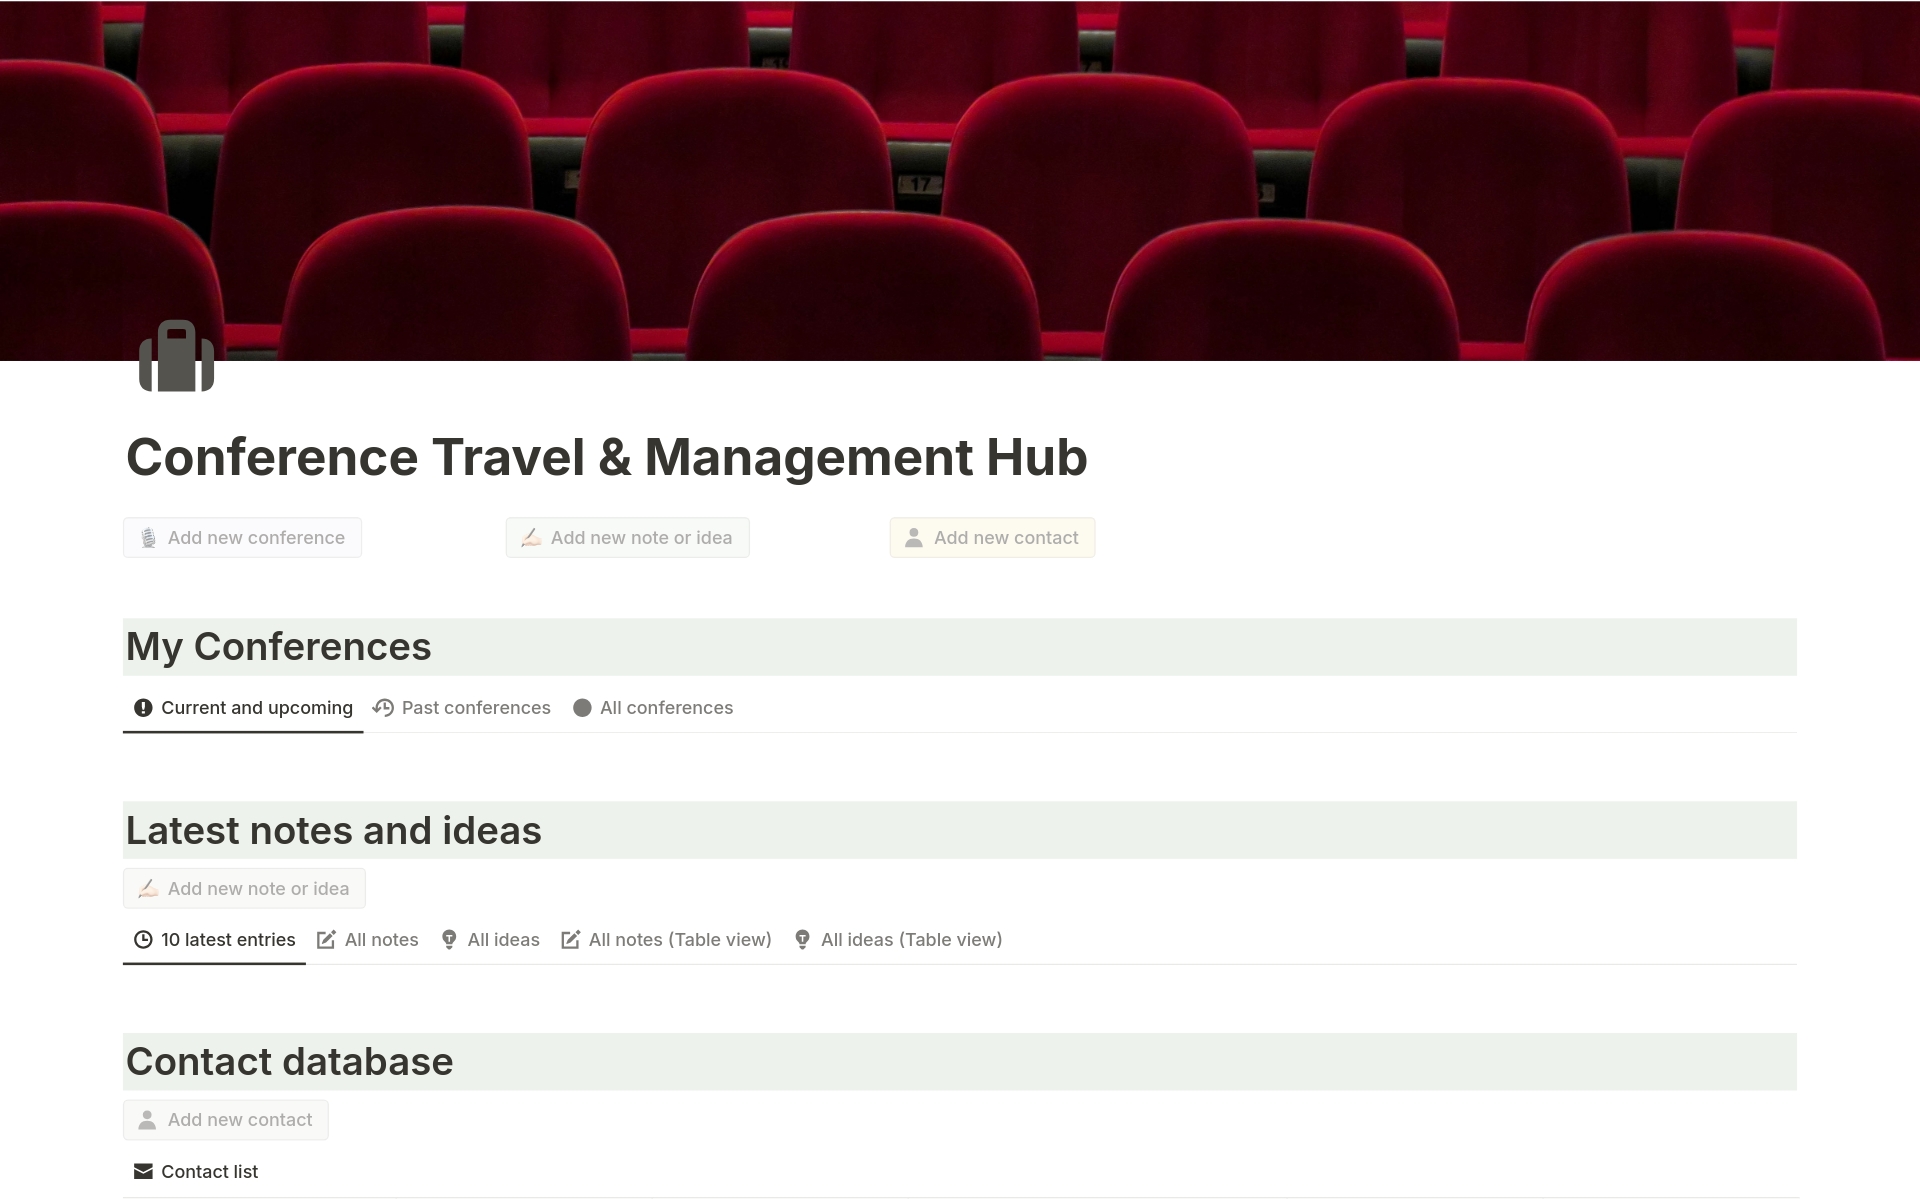 Hello, fellow academic! Stop missing out on the full potential of academic conferences! Organize your conference travel, schedule, notes, ideas, contacts, expenses, and much more in one place, and elevate your conference experience. Get your personal conference manager now!